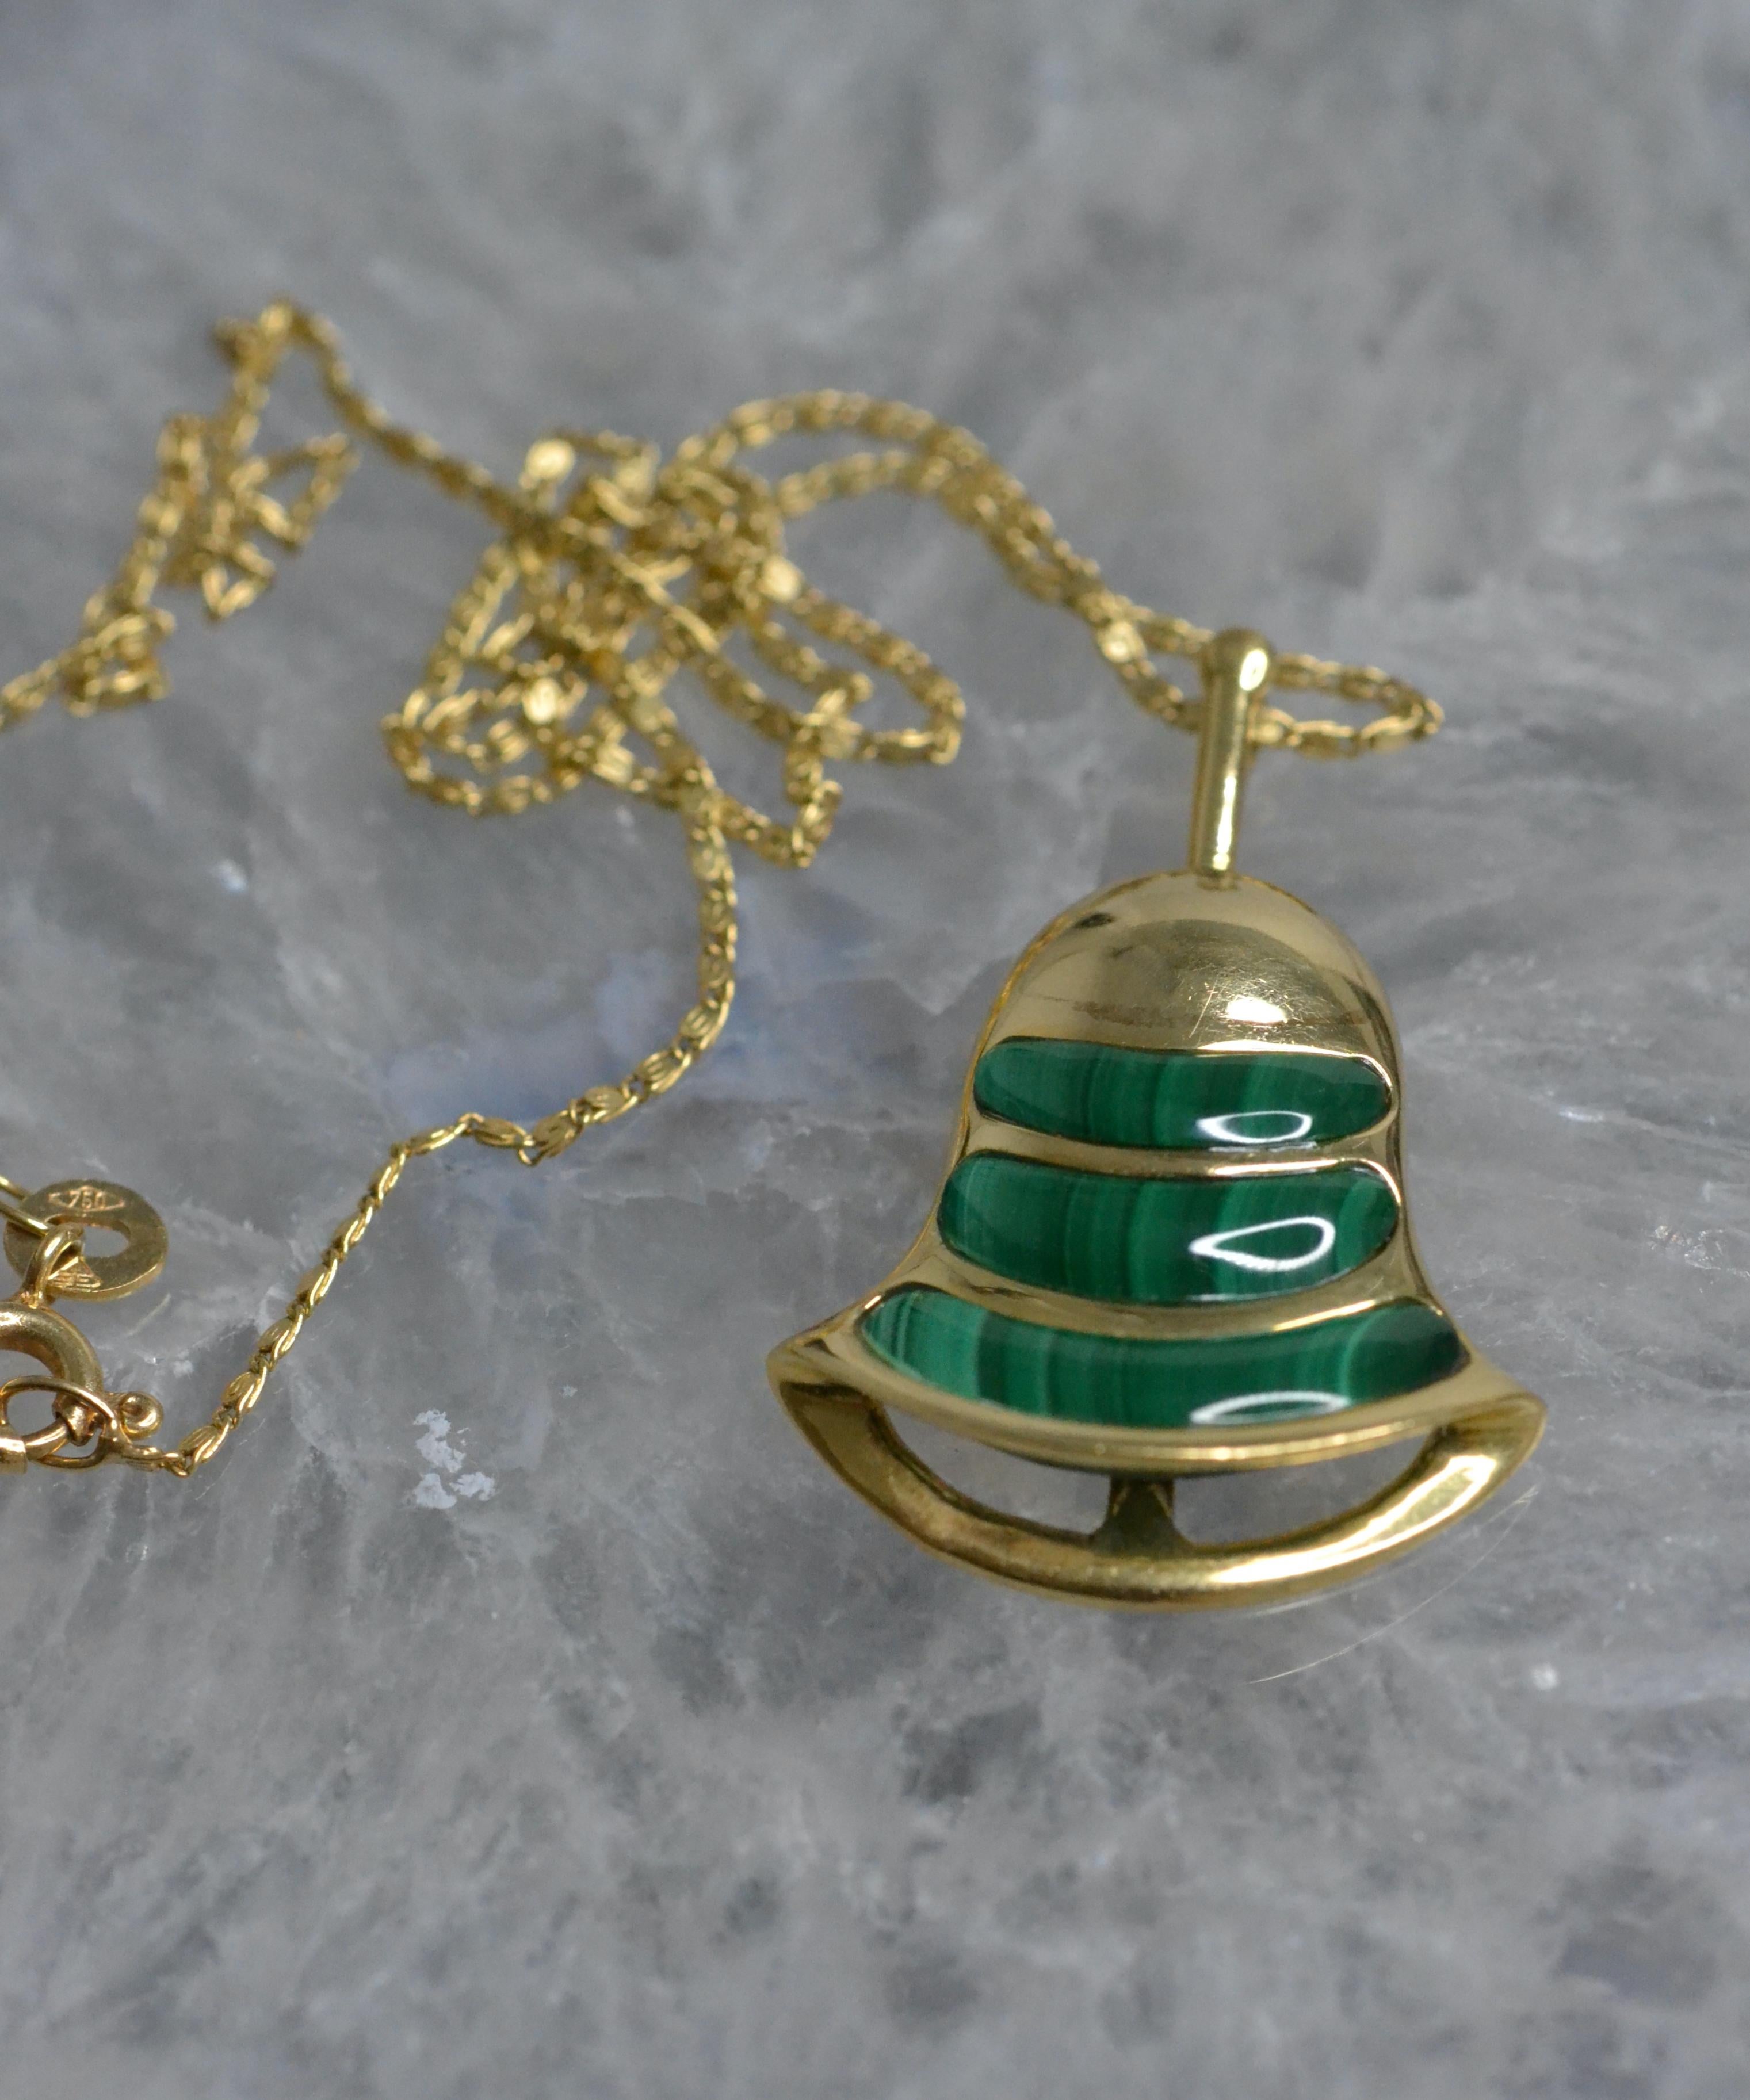 Vintage 18k Gold Bell Necklace with Malachite

These vintage bell necklaces are the perfect way to add a splash of colour to any outfit. Available in malachite, red jasper, tiger's eye and onyx, these limited edition necklaces from the 80s have a